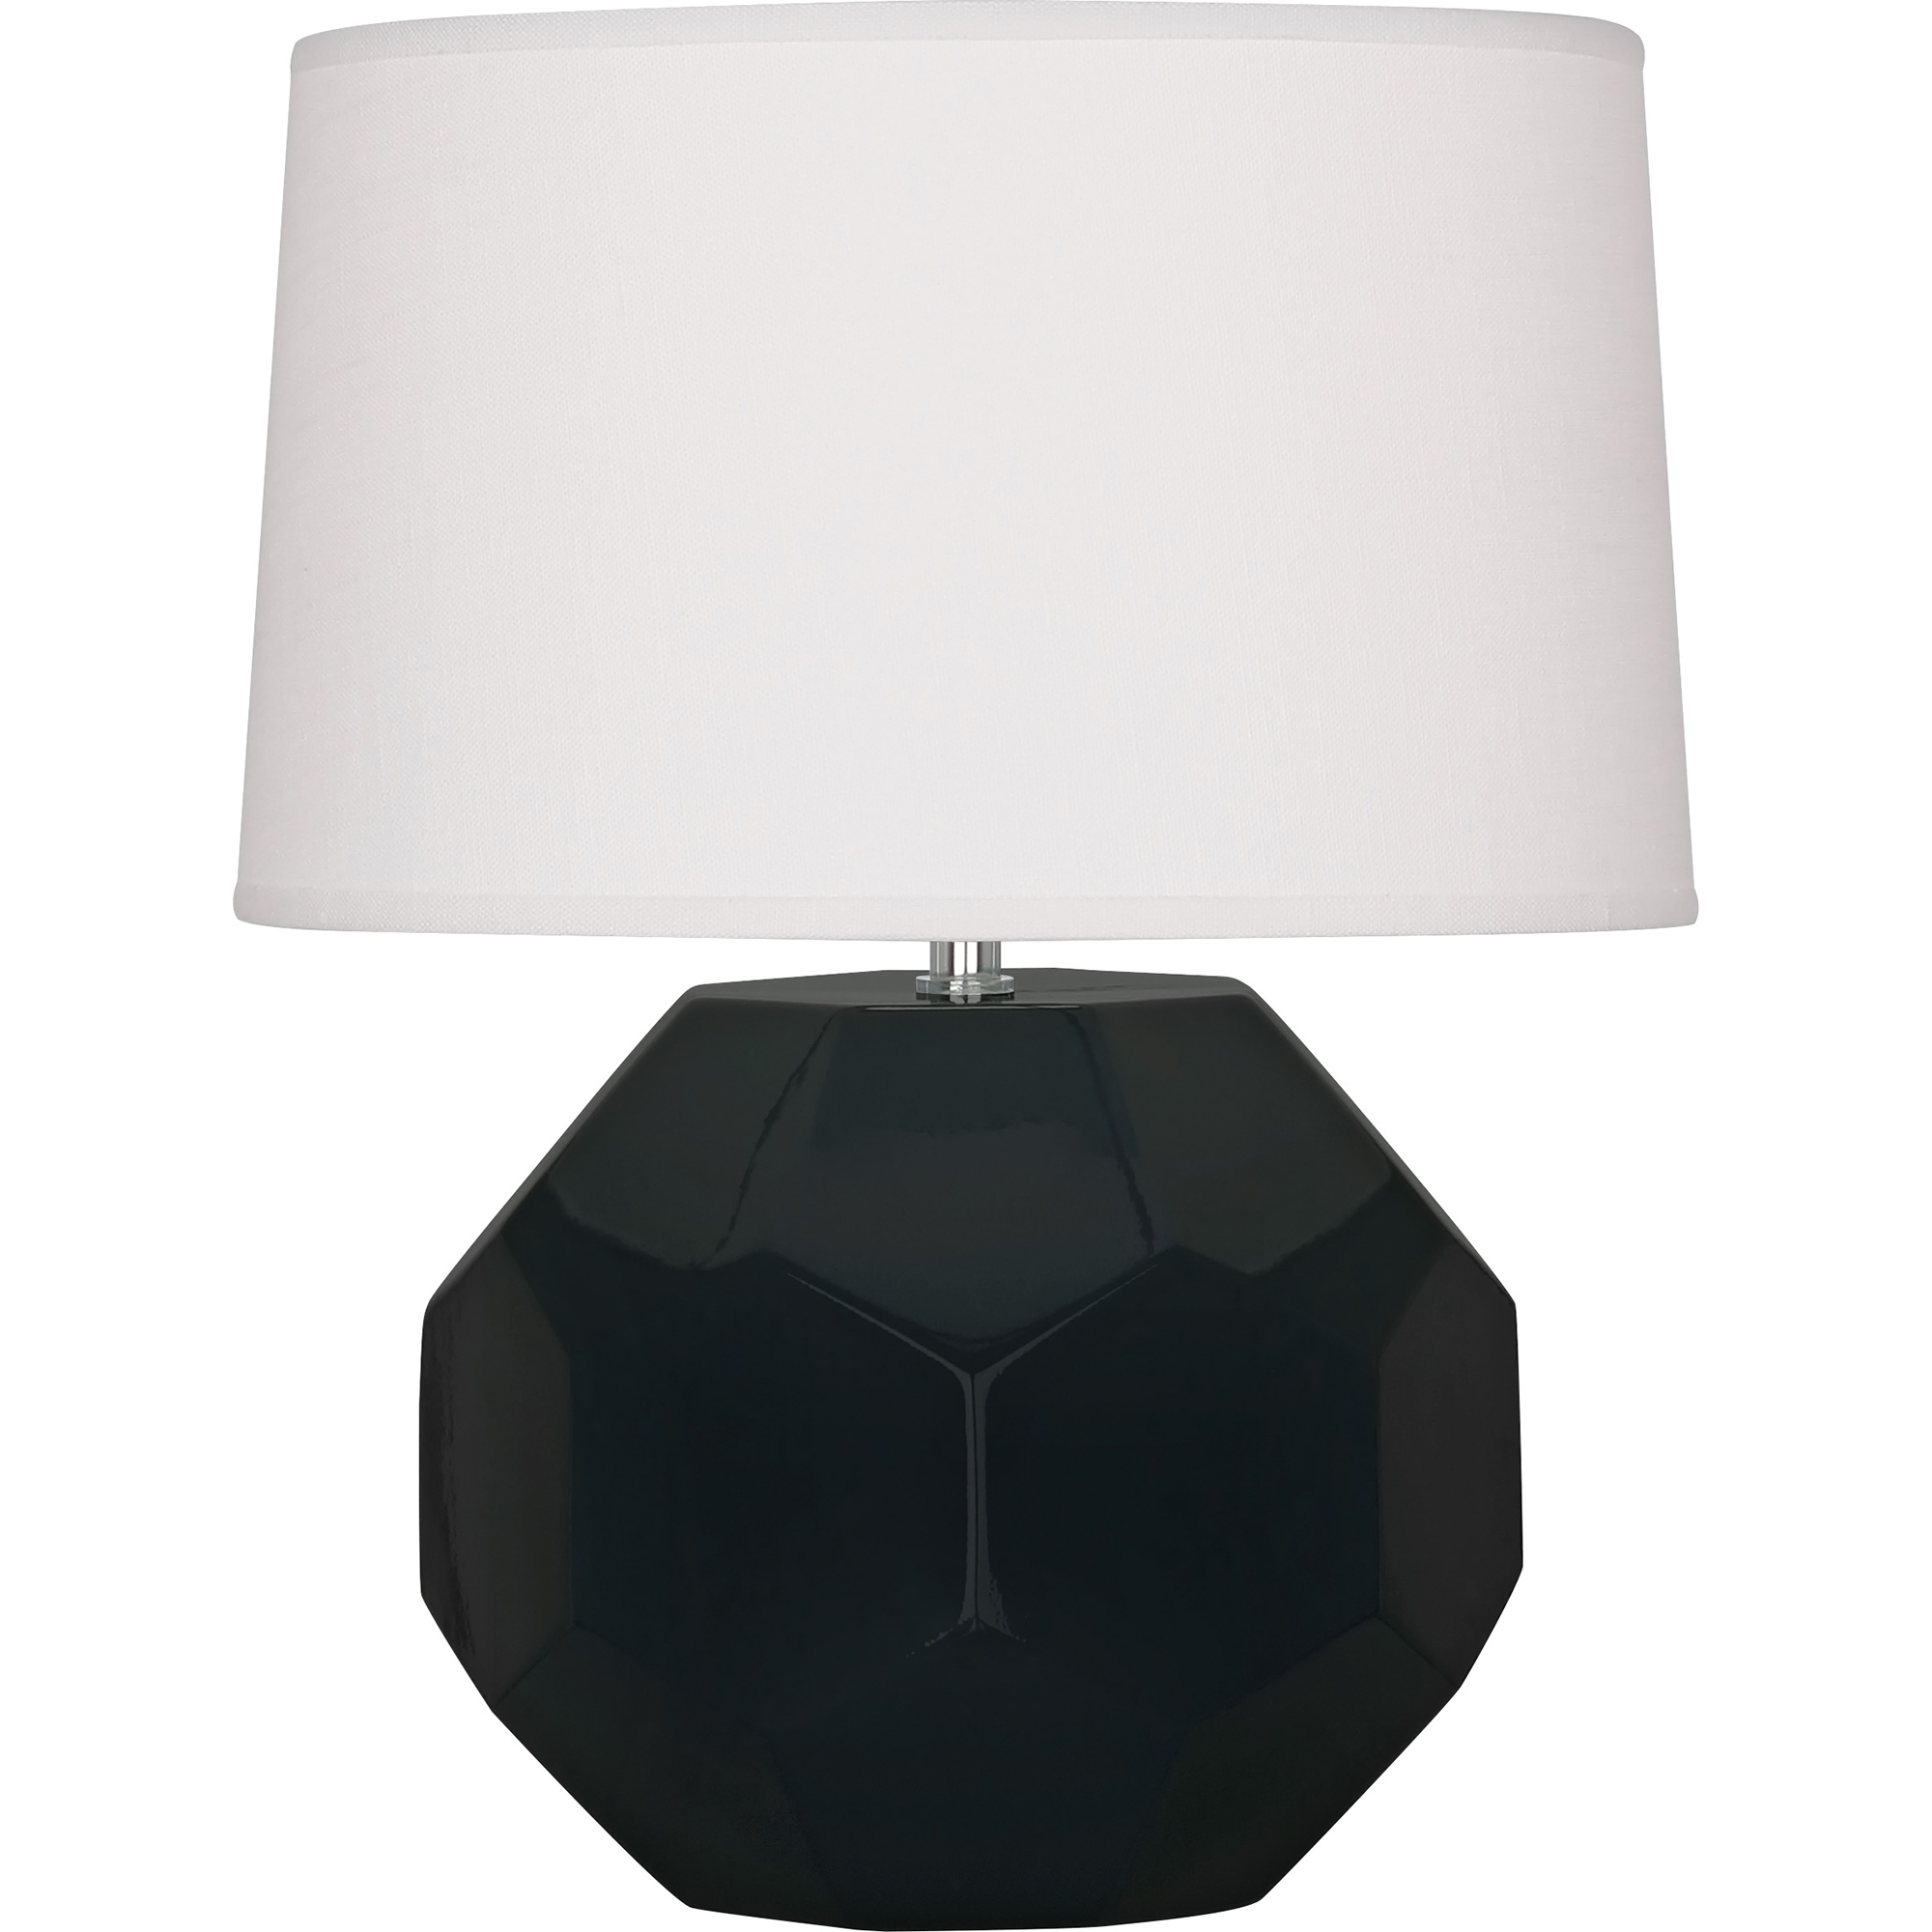 Franklin Accent Lamp Style #OS02